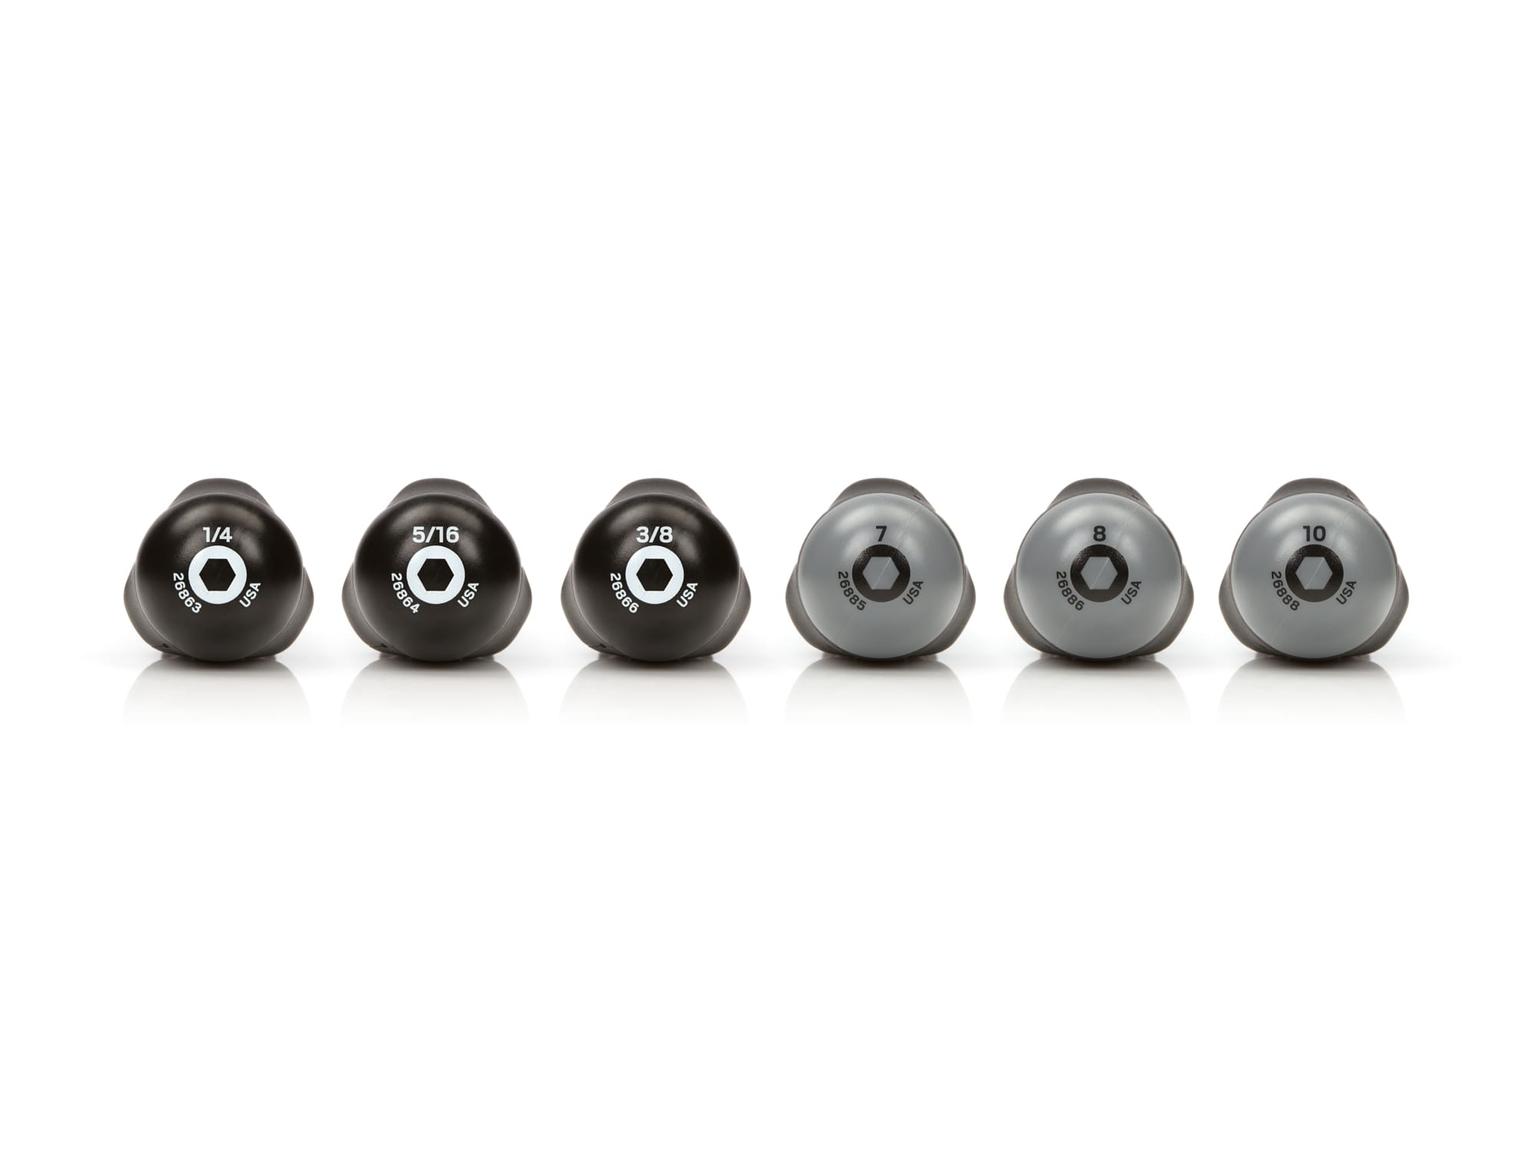 TEKTON DHD91301-T High-Torque Black Oxide Blade Nut Driver Set, 6-Piece (1/4-3/8 in., 7-10 mm)